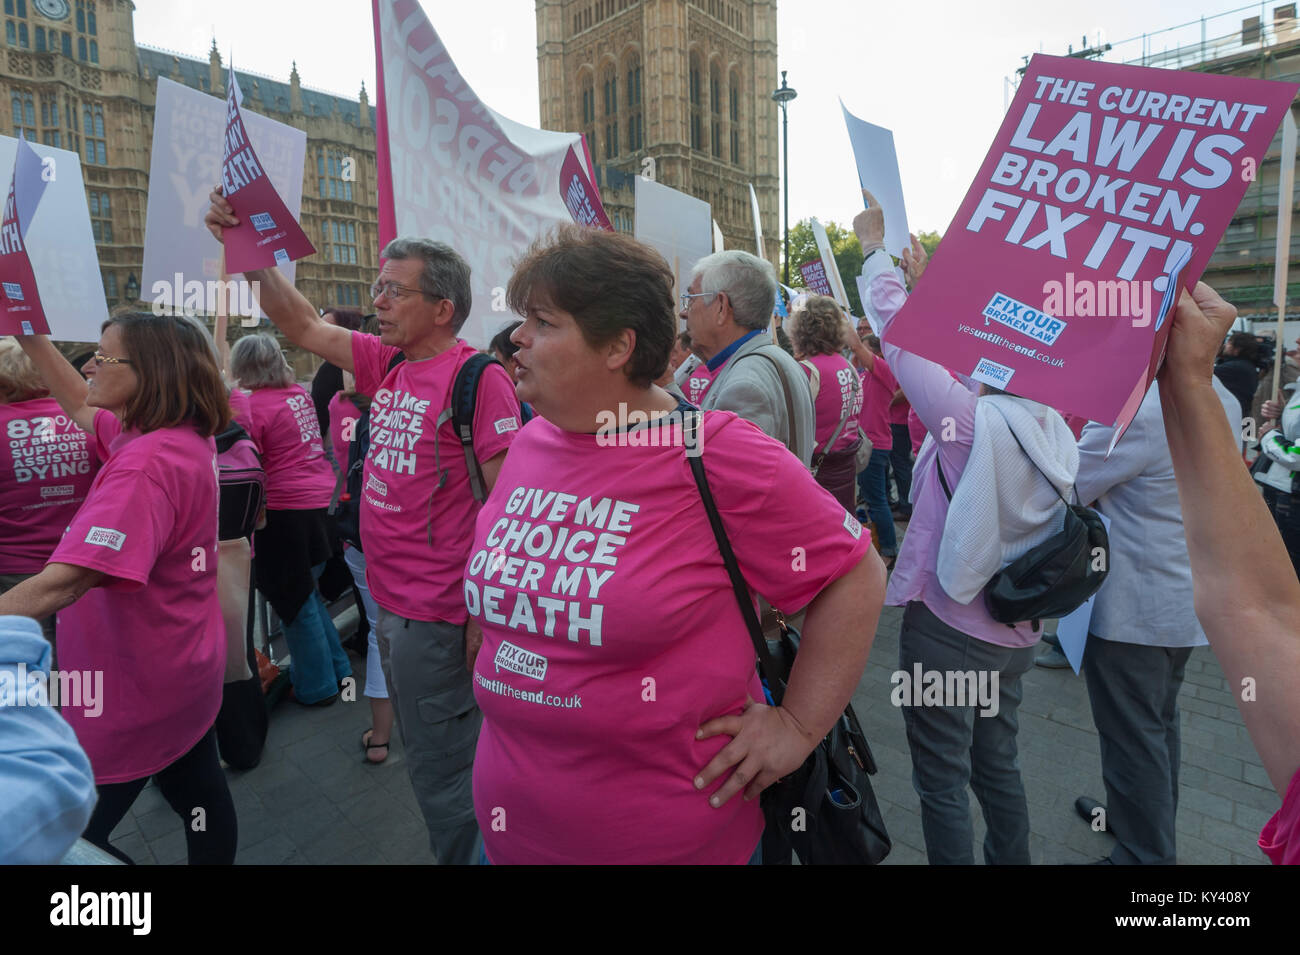 Supporter of the Assisted Suicide Bill being debated in Parliament  with t-shirts, placards and posters. Stock Photo